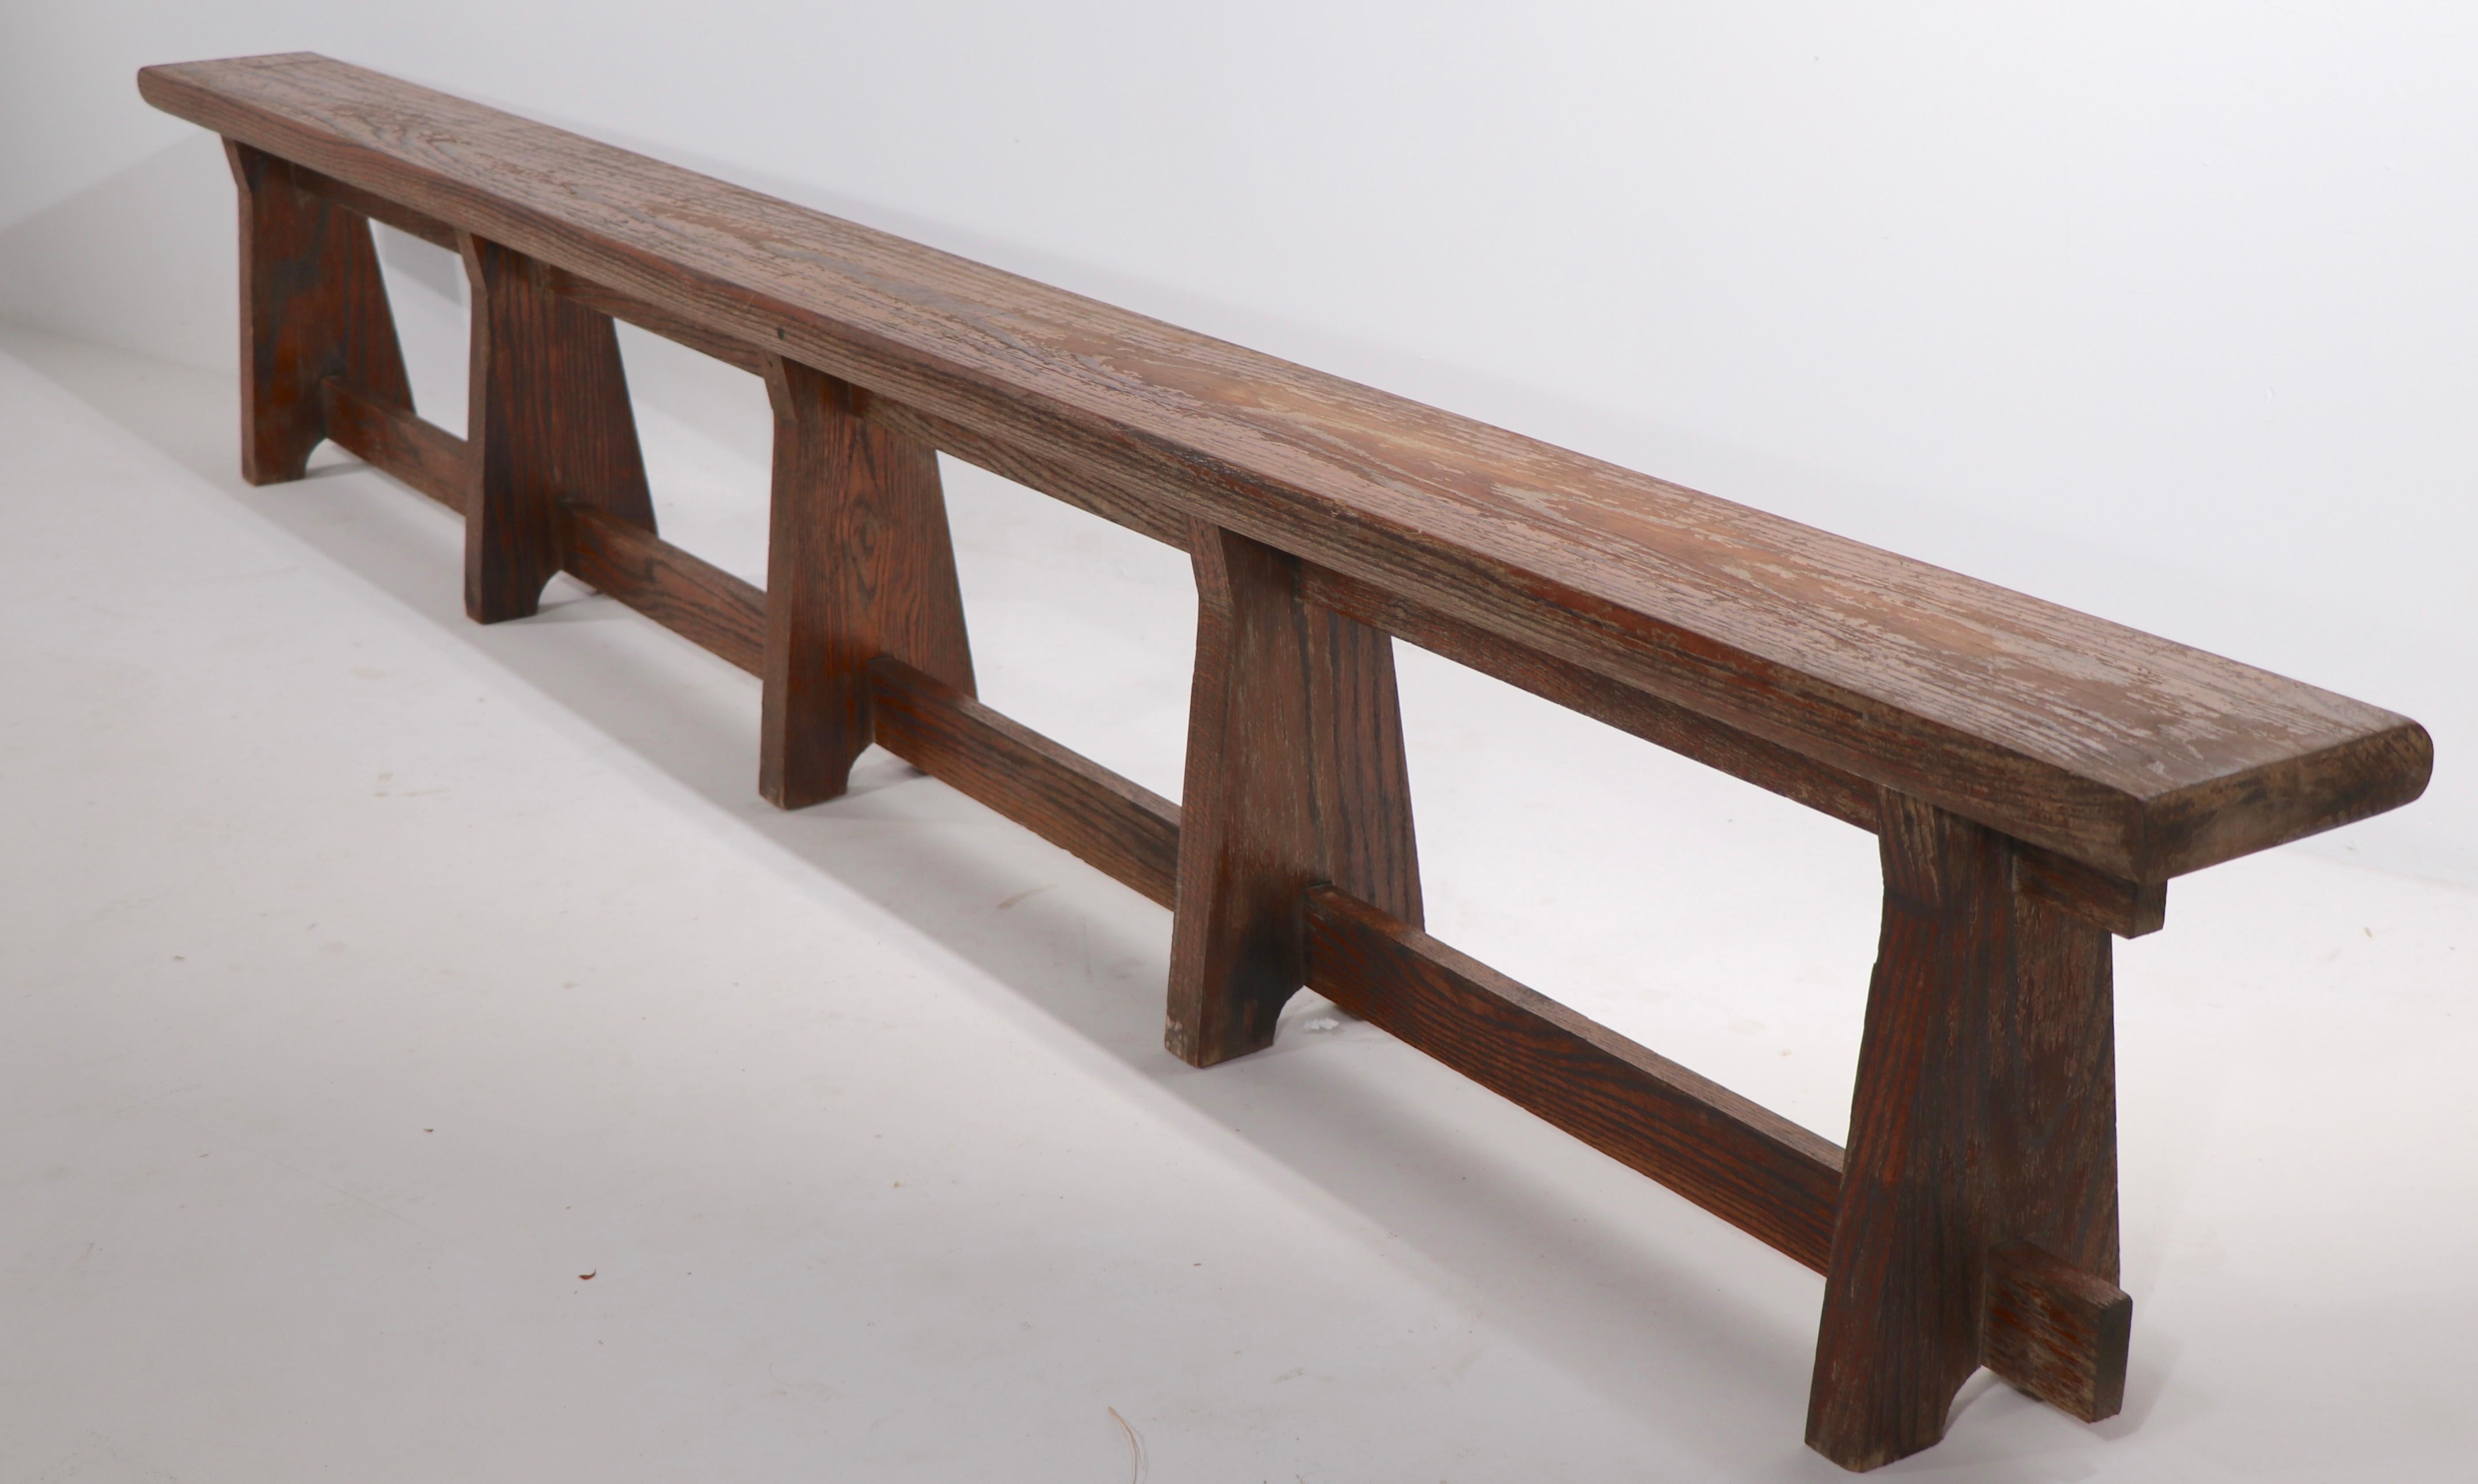 Rustic Adirondack Arts and Crafts Style Benches 3